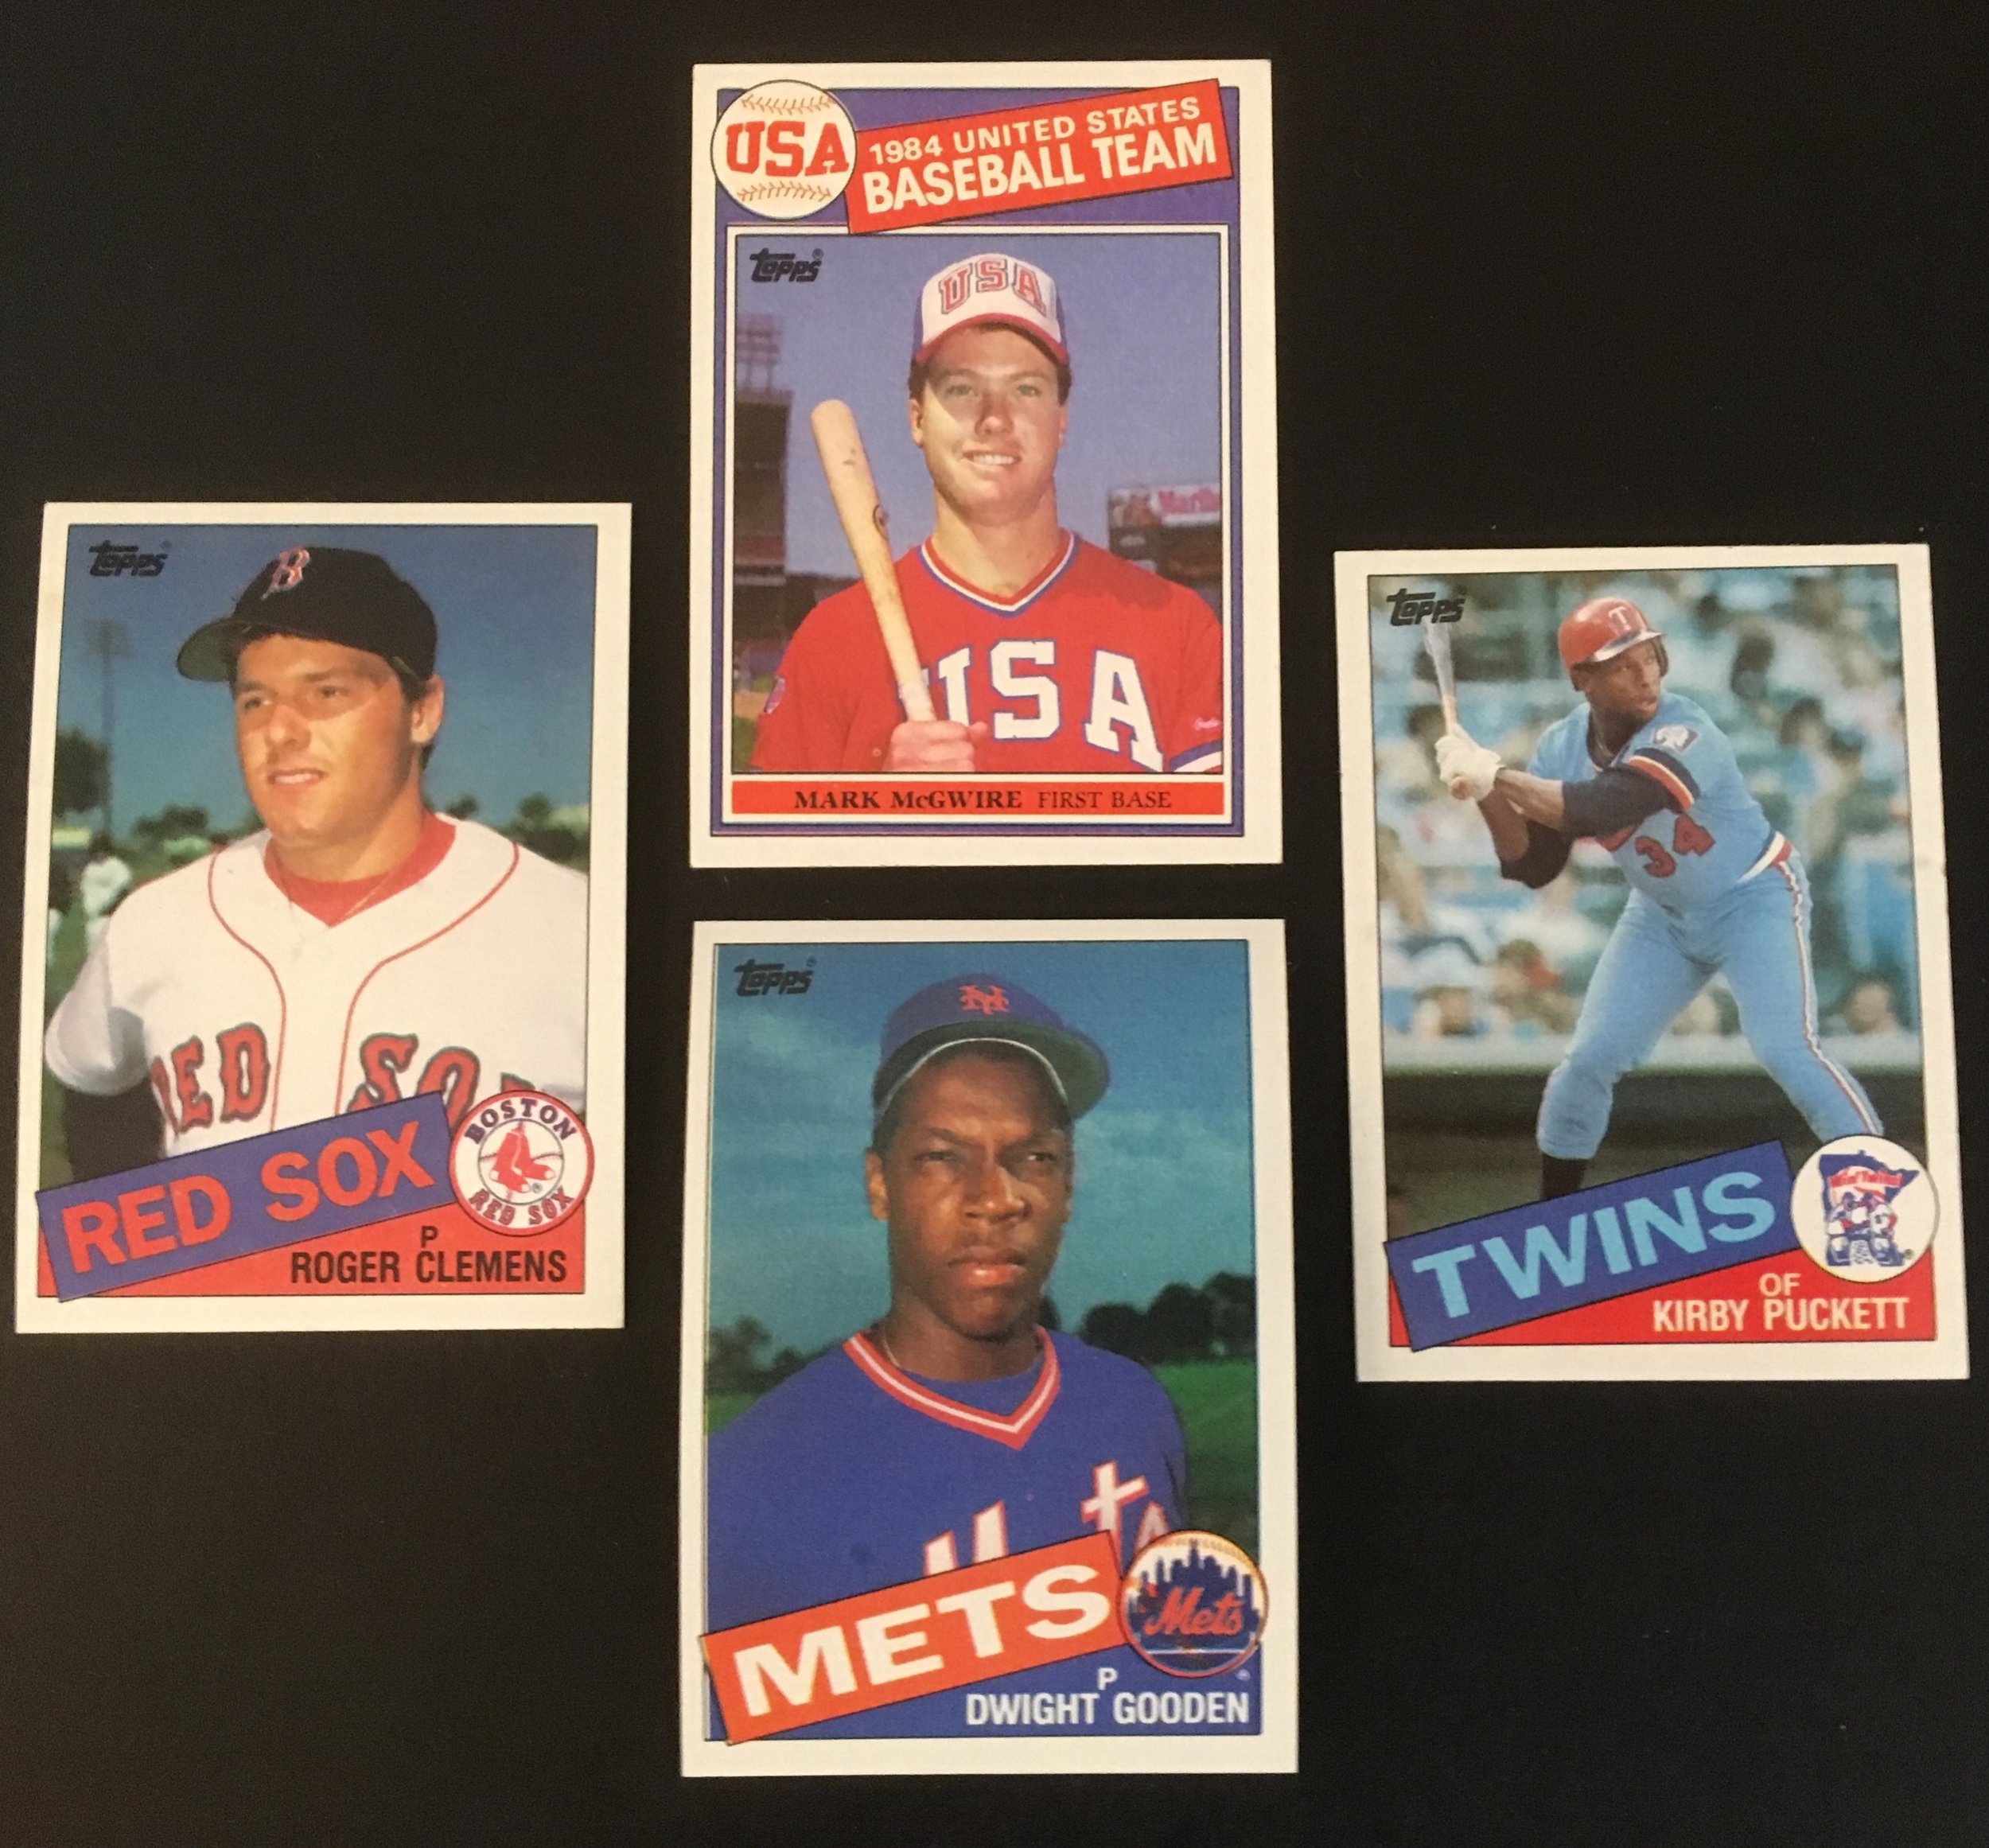 Roger Clemens Rookie Cards: The Ultimate Collector's Guide - Old